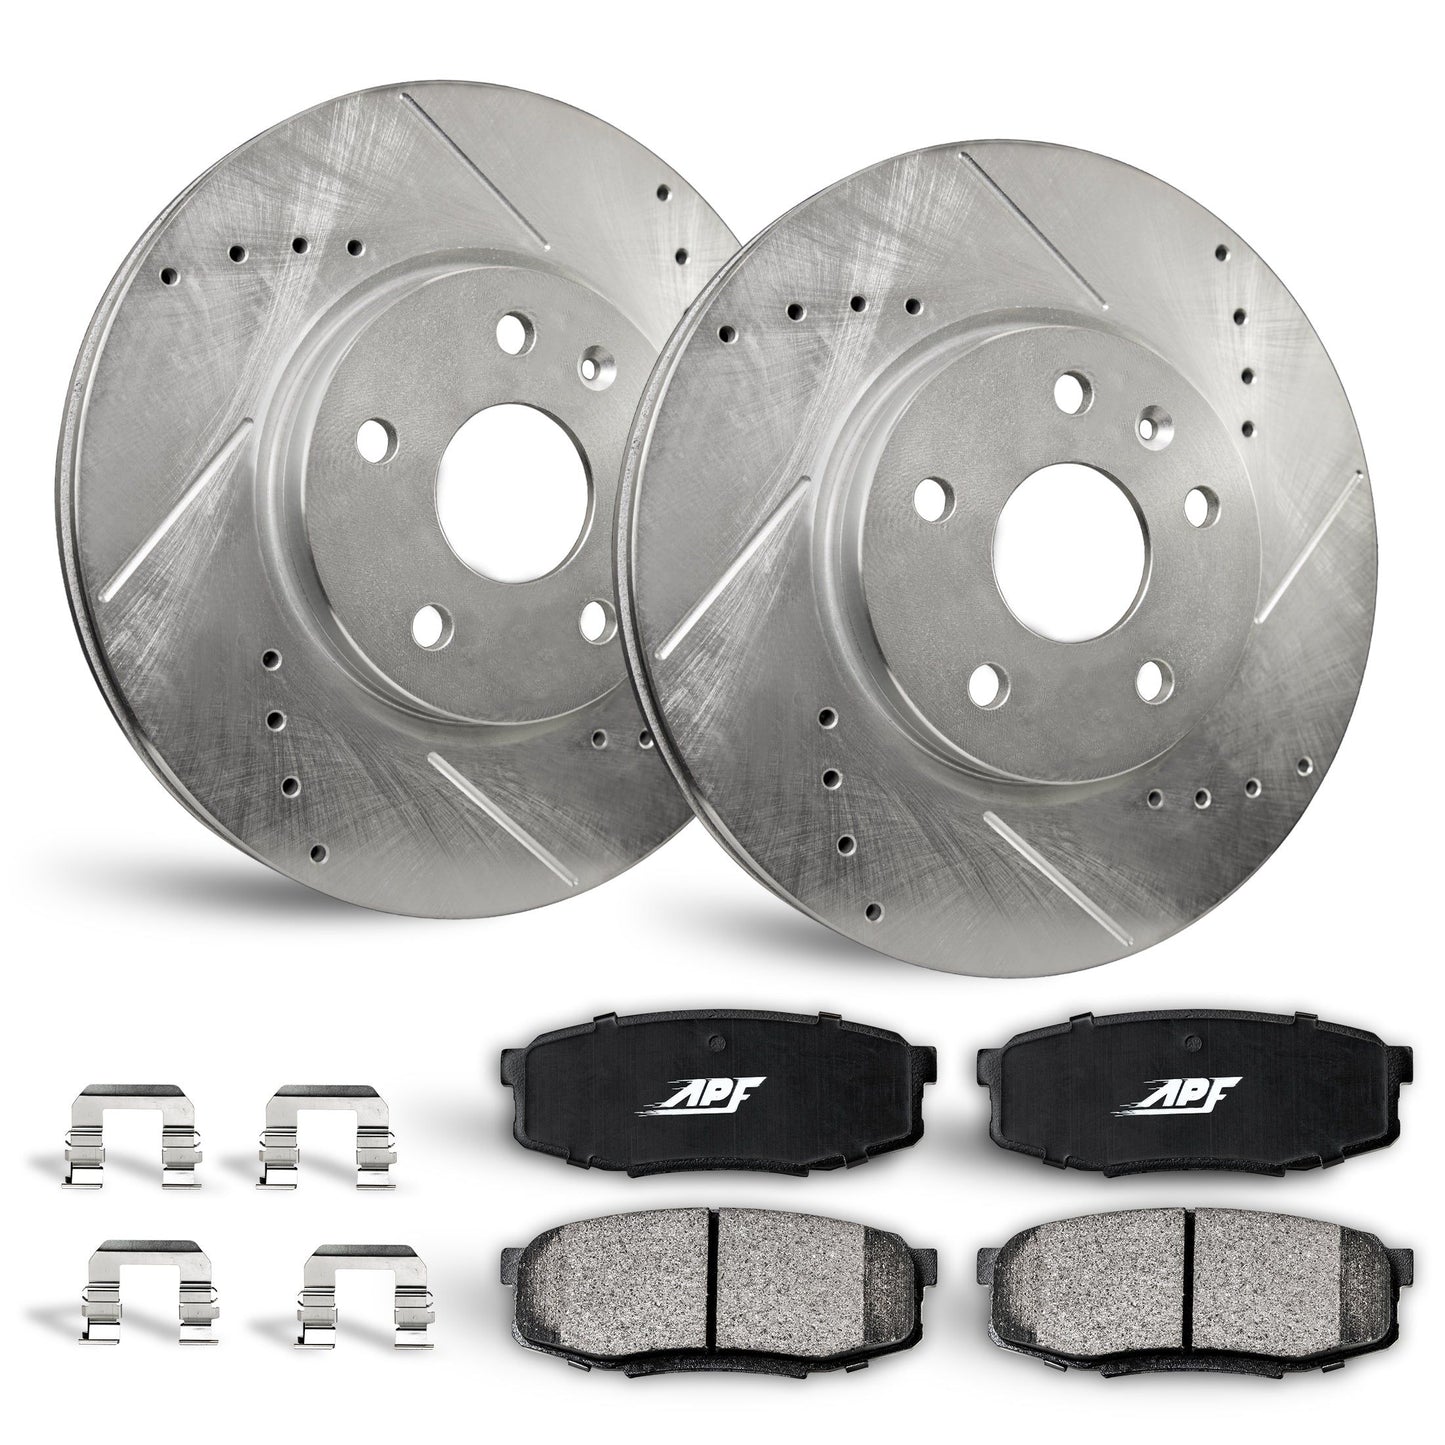 APF Front Brake Kit compatible with Acura ILX 2013-2015 | Zinc Drilled Slotted Rotors with Ceramic Carbon Fiber Brake Pads